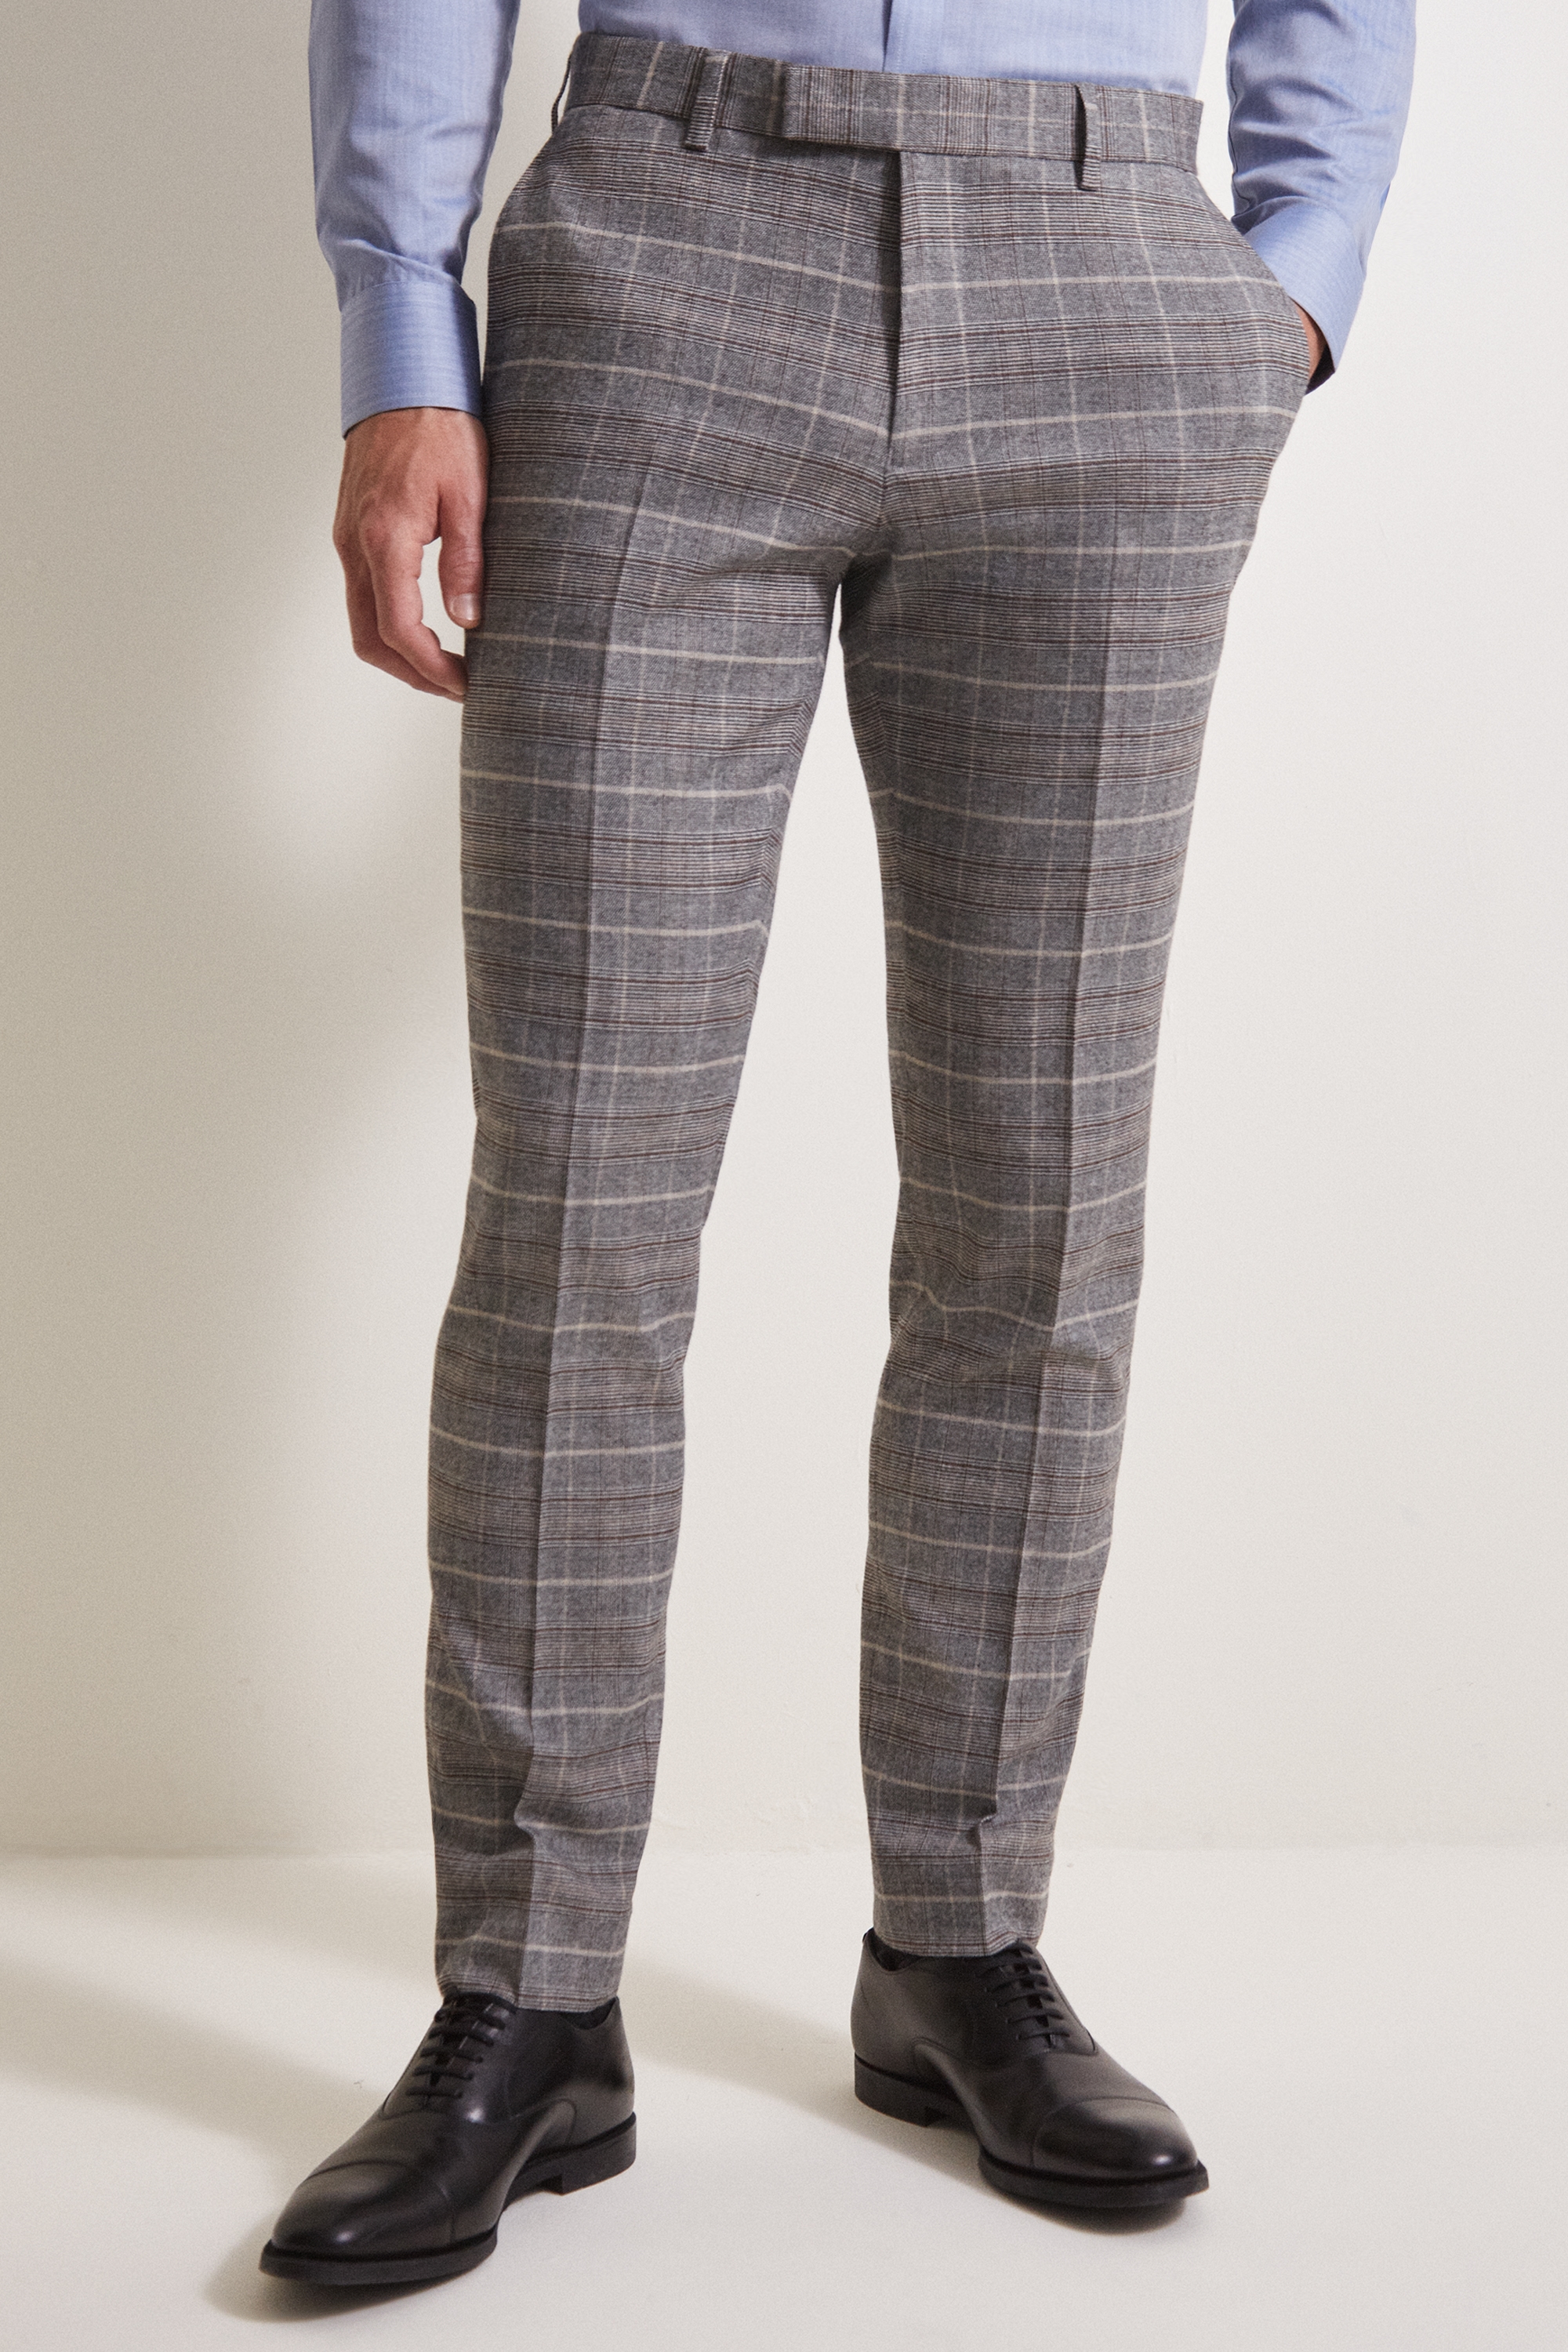 Moss 1851 Tailored Fit Grey/ Tan Check Trouser